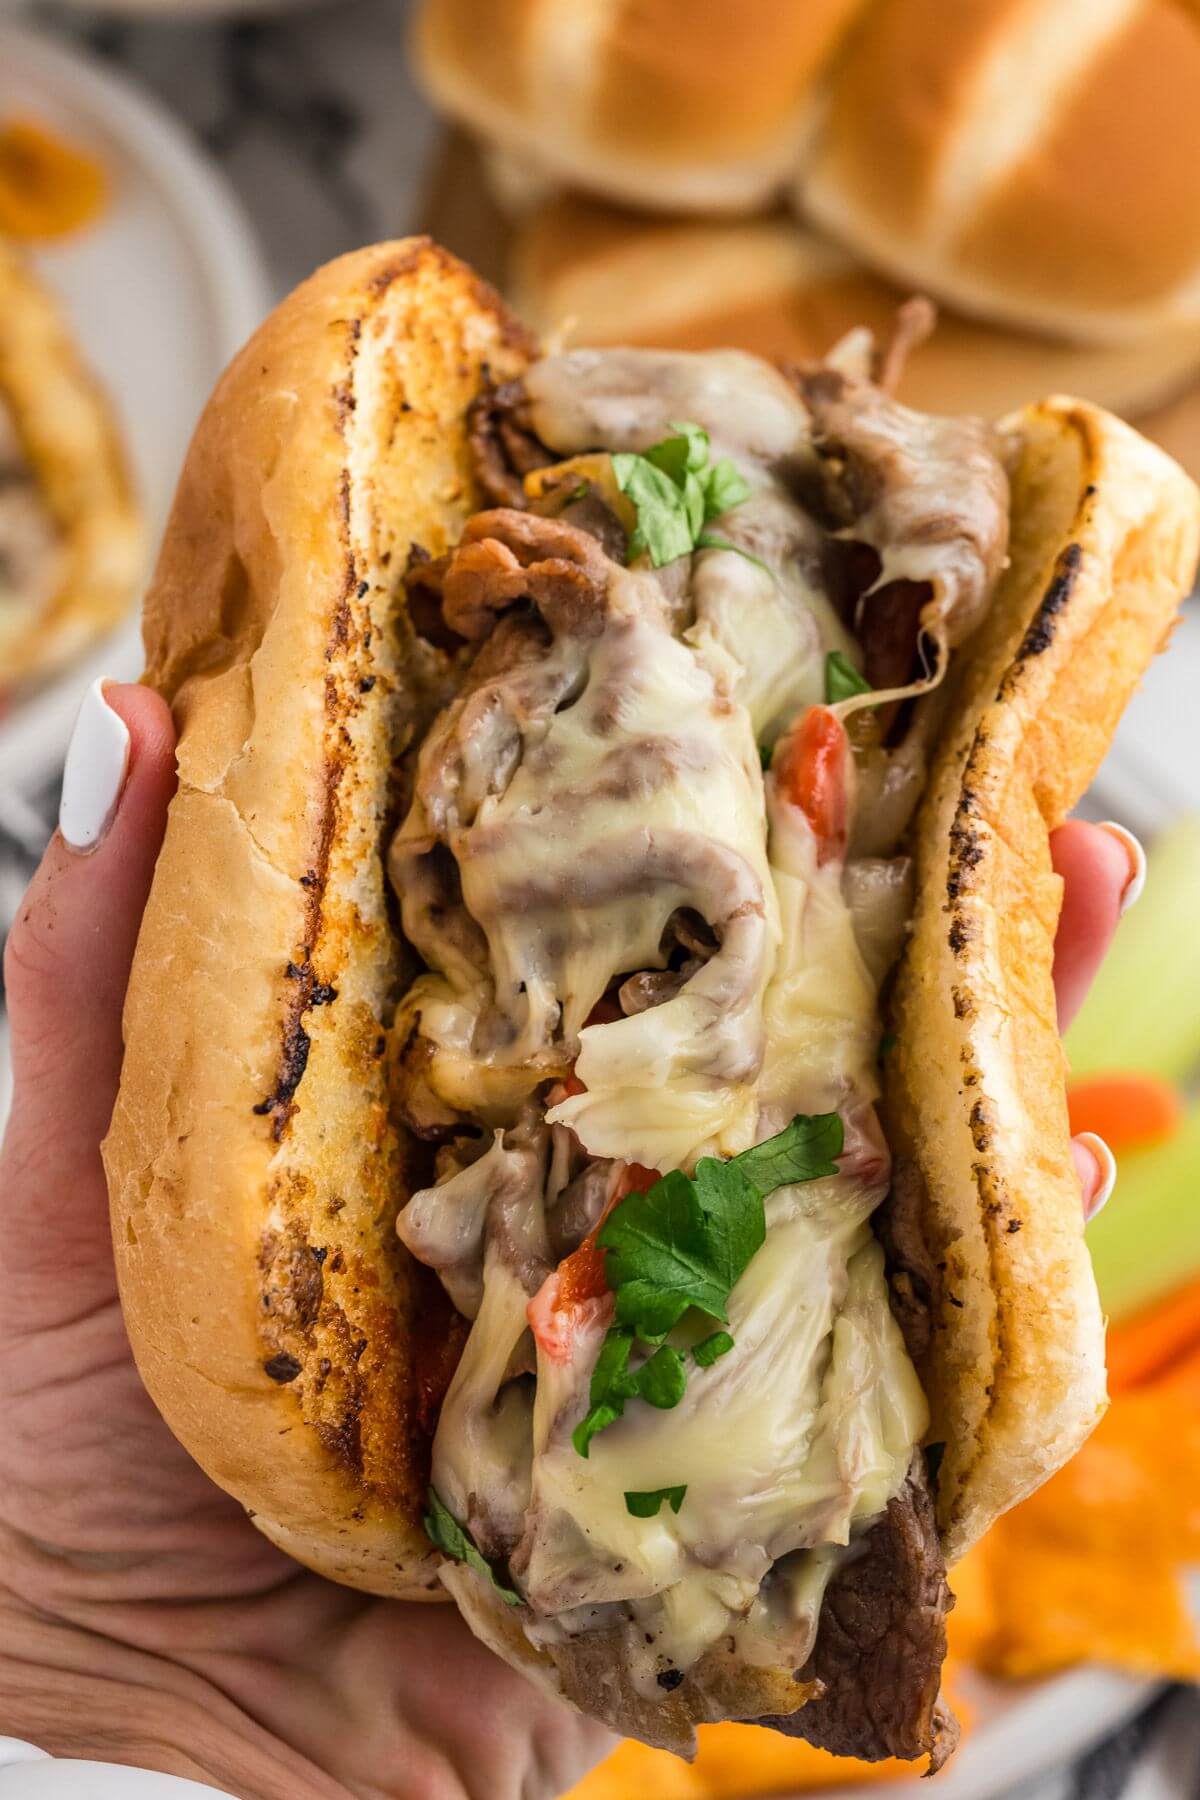 A hand holds a thick, gooey Philly cheesesteak sandwich.